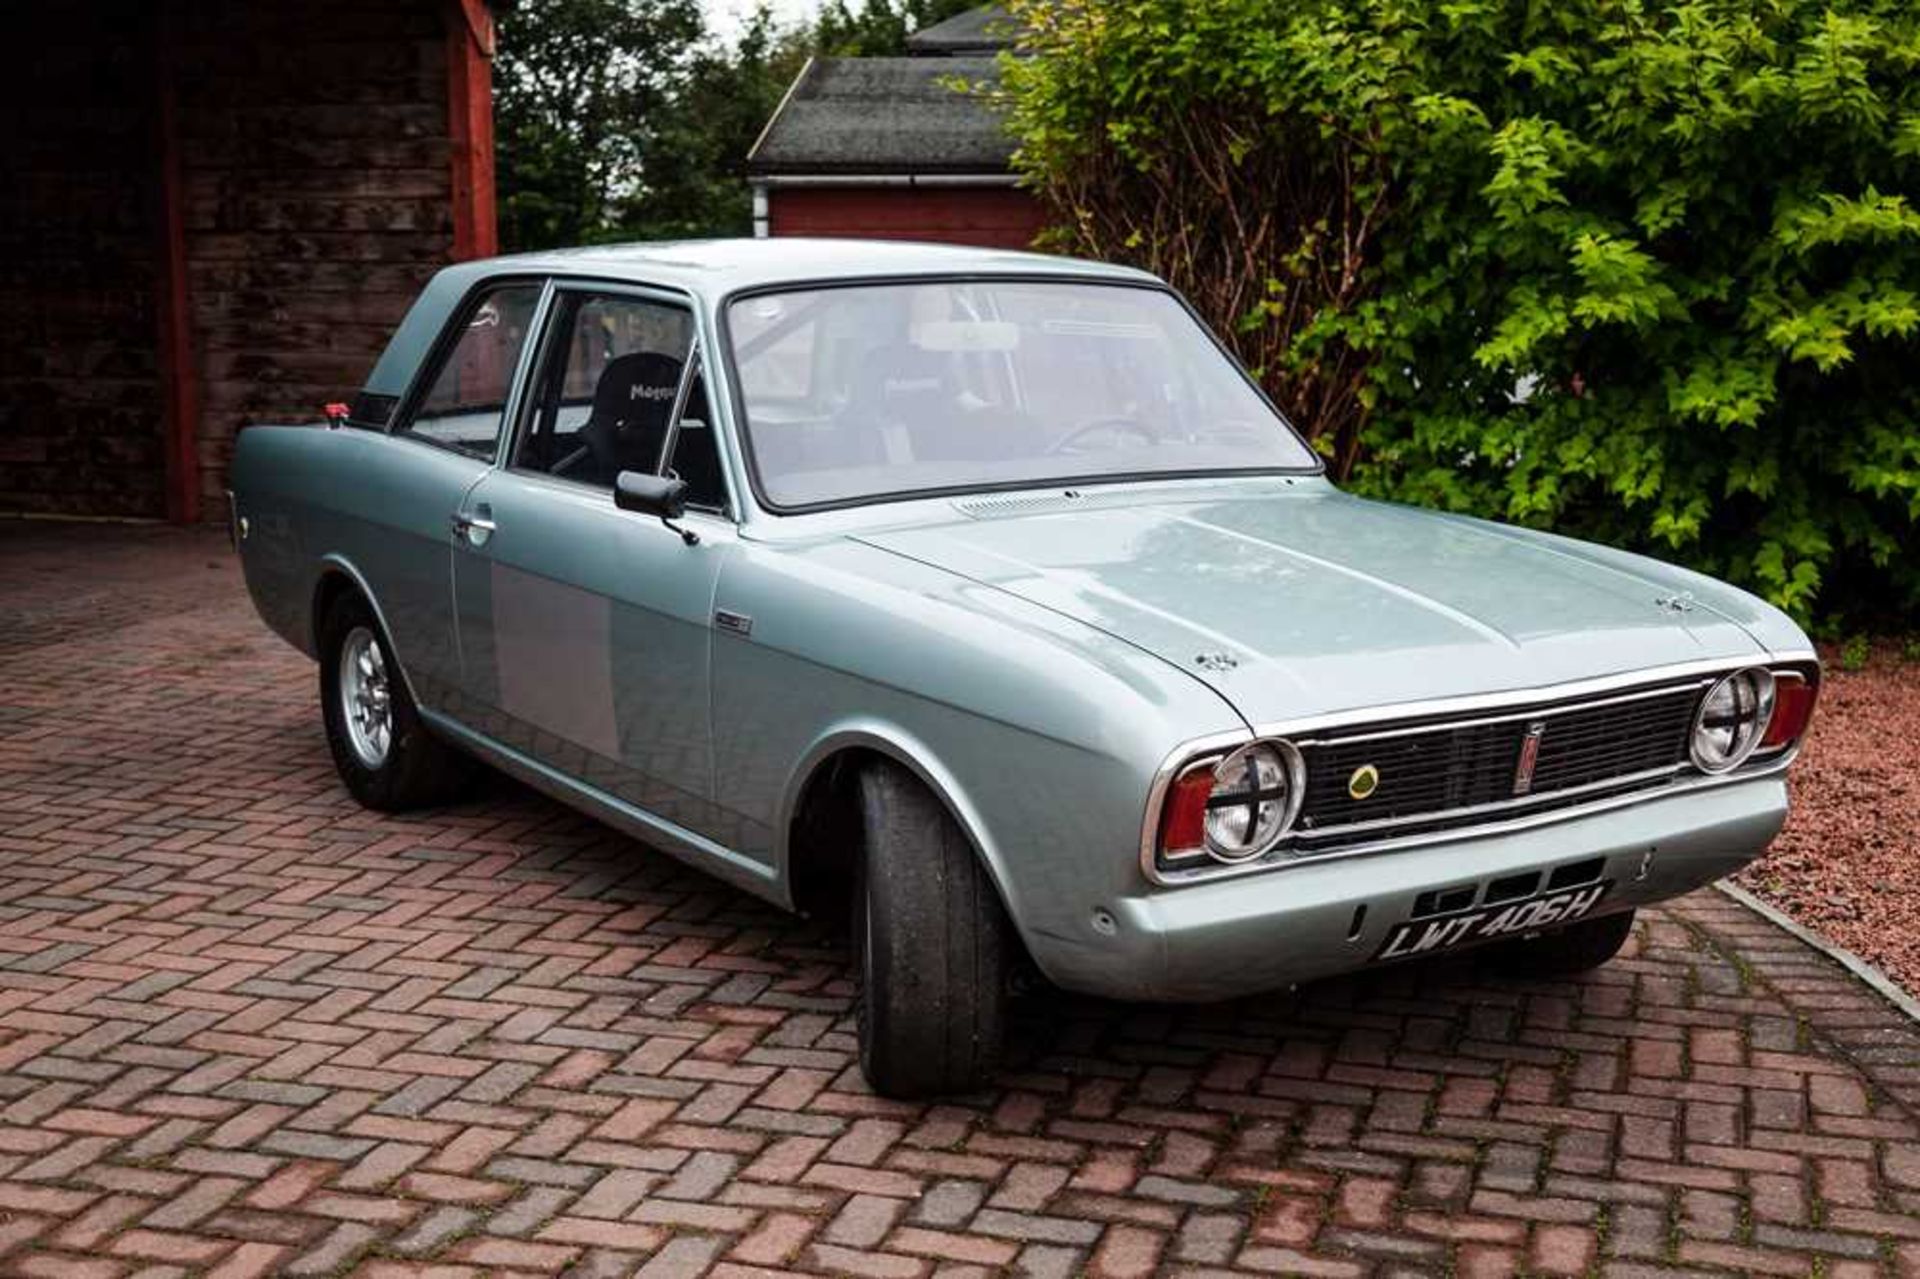 1969 Ford Cortina 'Lotus' Competition Saloon Powered by a 1598cc FIA-legal Lotus Twin-Cam with Twin - Image 3 of 55